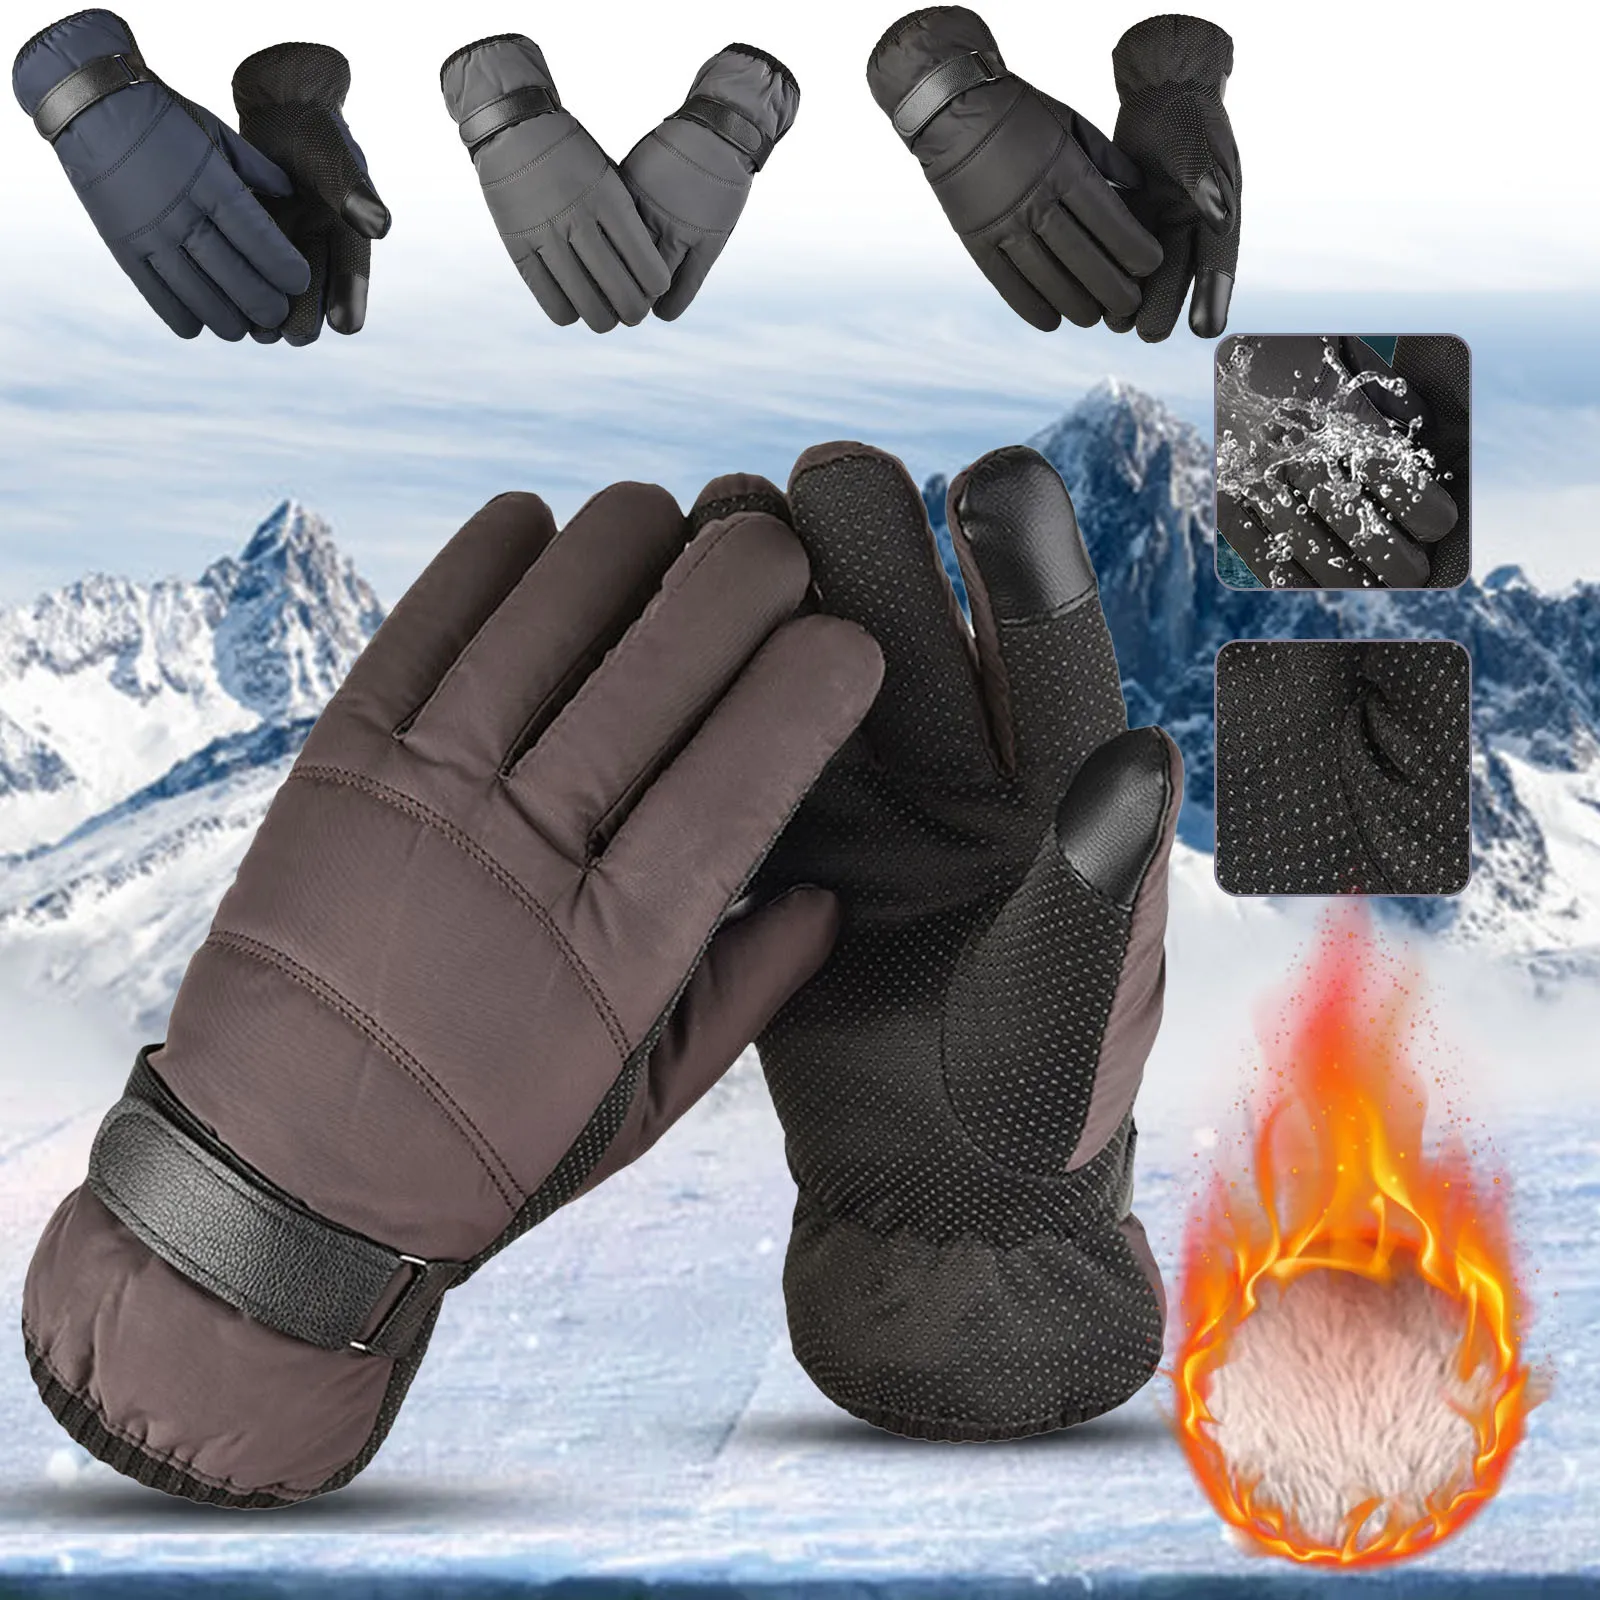 

Outdoor Men Winter Warm Solid Touchscreen Gloves Unisex Cold Weather Knit Elastic Cuff Thermal Gloves for Driving